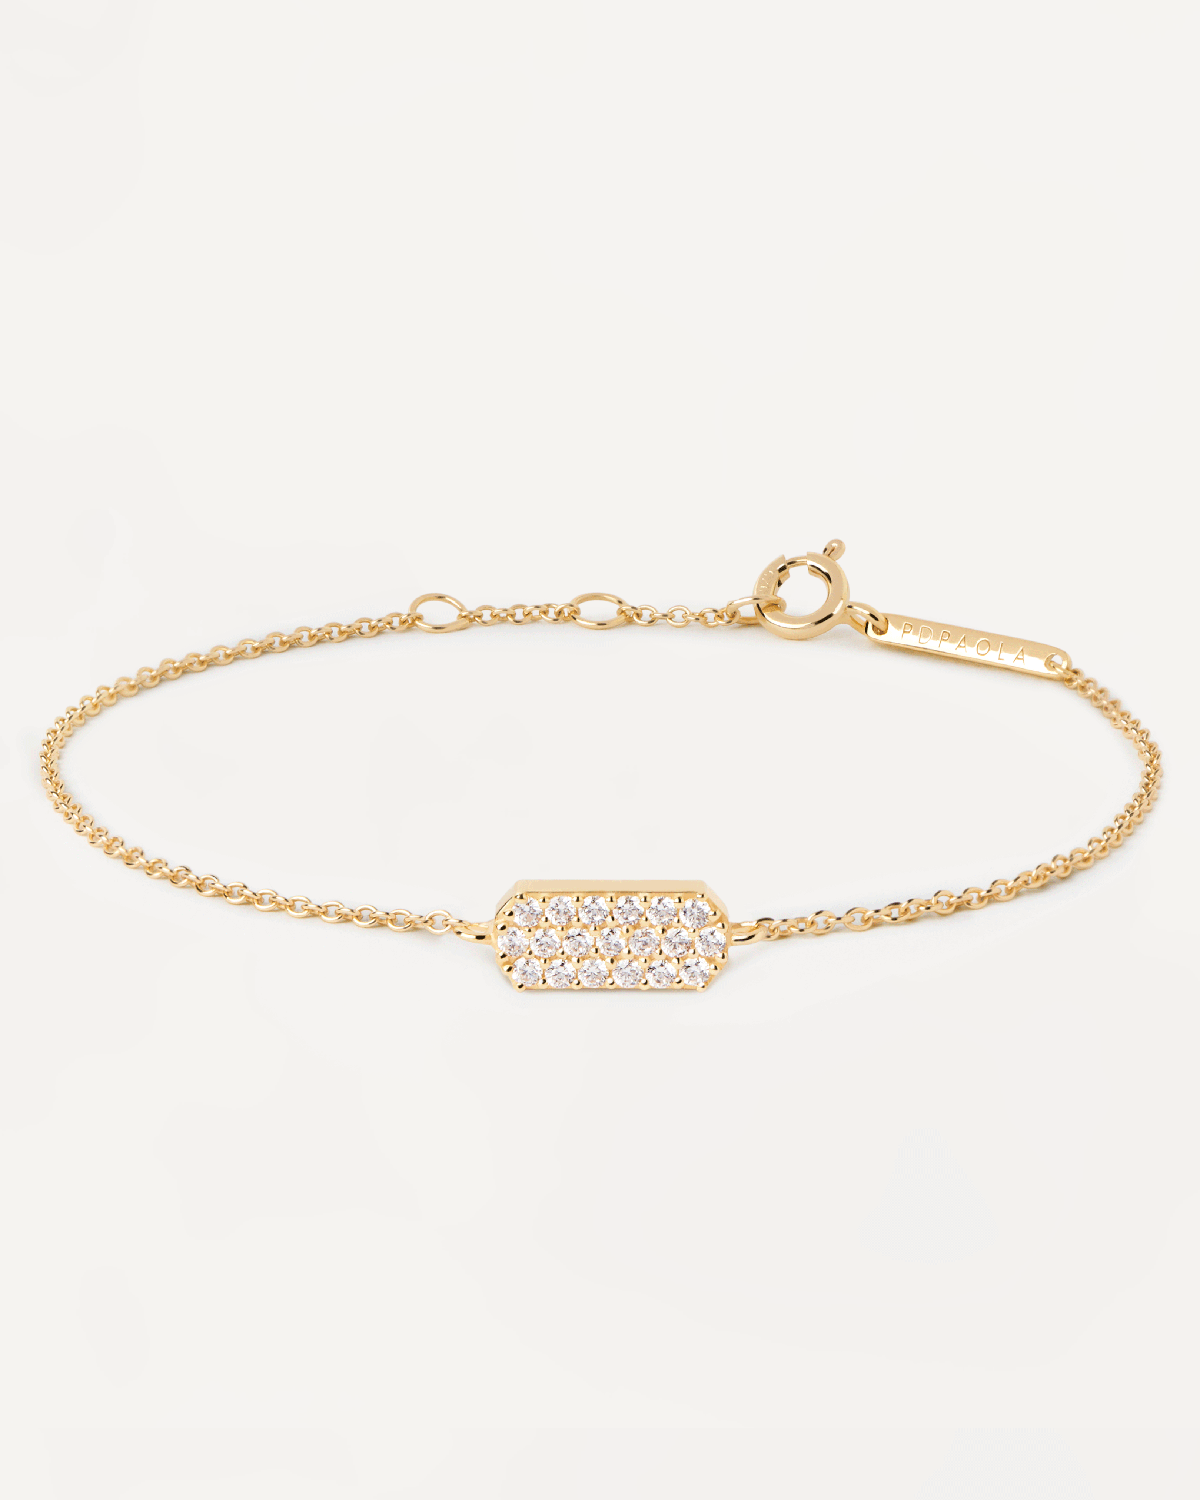 2023 Selection | Icy Bracelet. Gold-plated bracelet with oval motiv and white zirconia. Get the latest arrival from PDPAOLA. Place your order safely and get this Best Seller. Free Shipping.